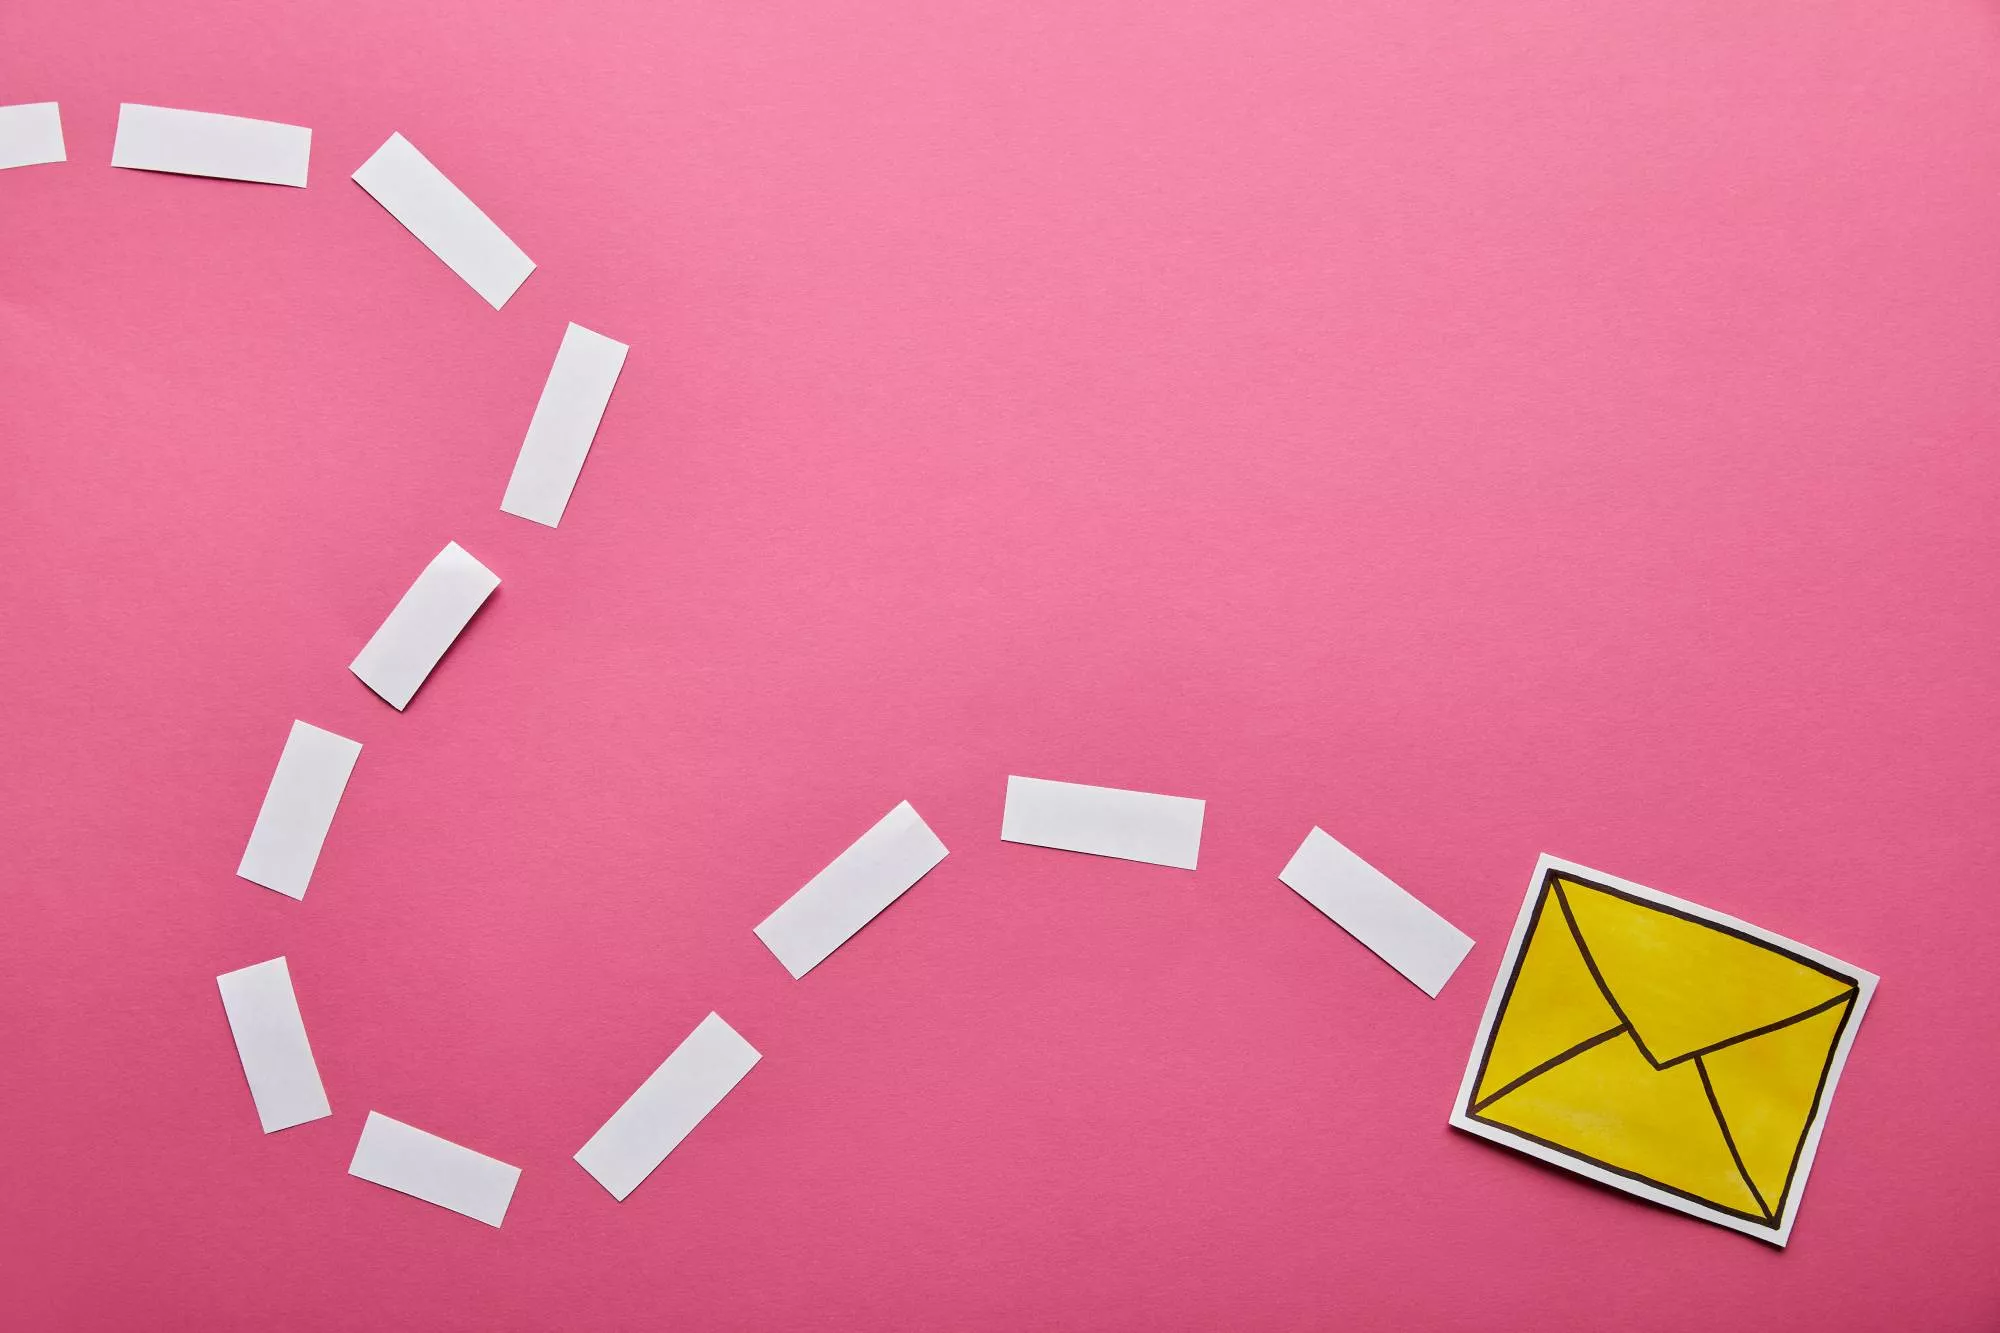 cut out of mail against pink background symbolizing abandoned cart email